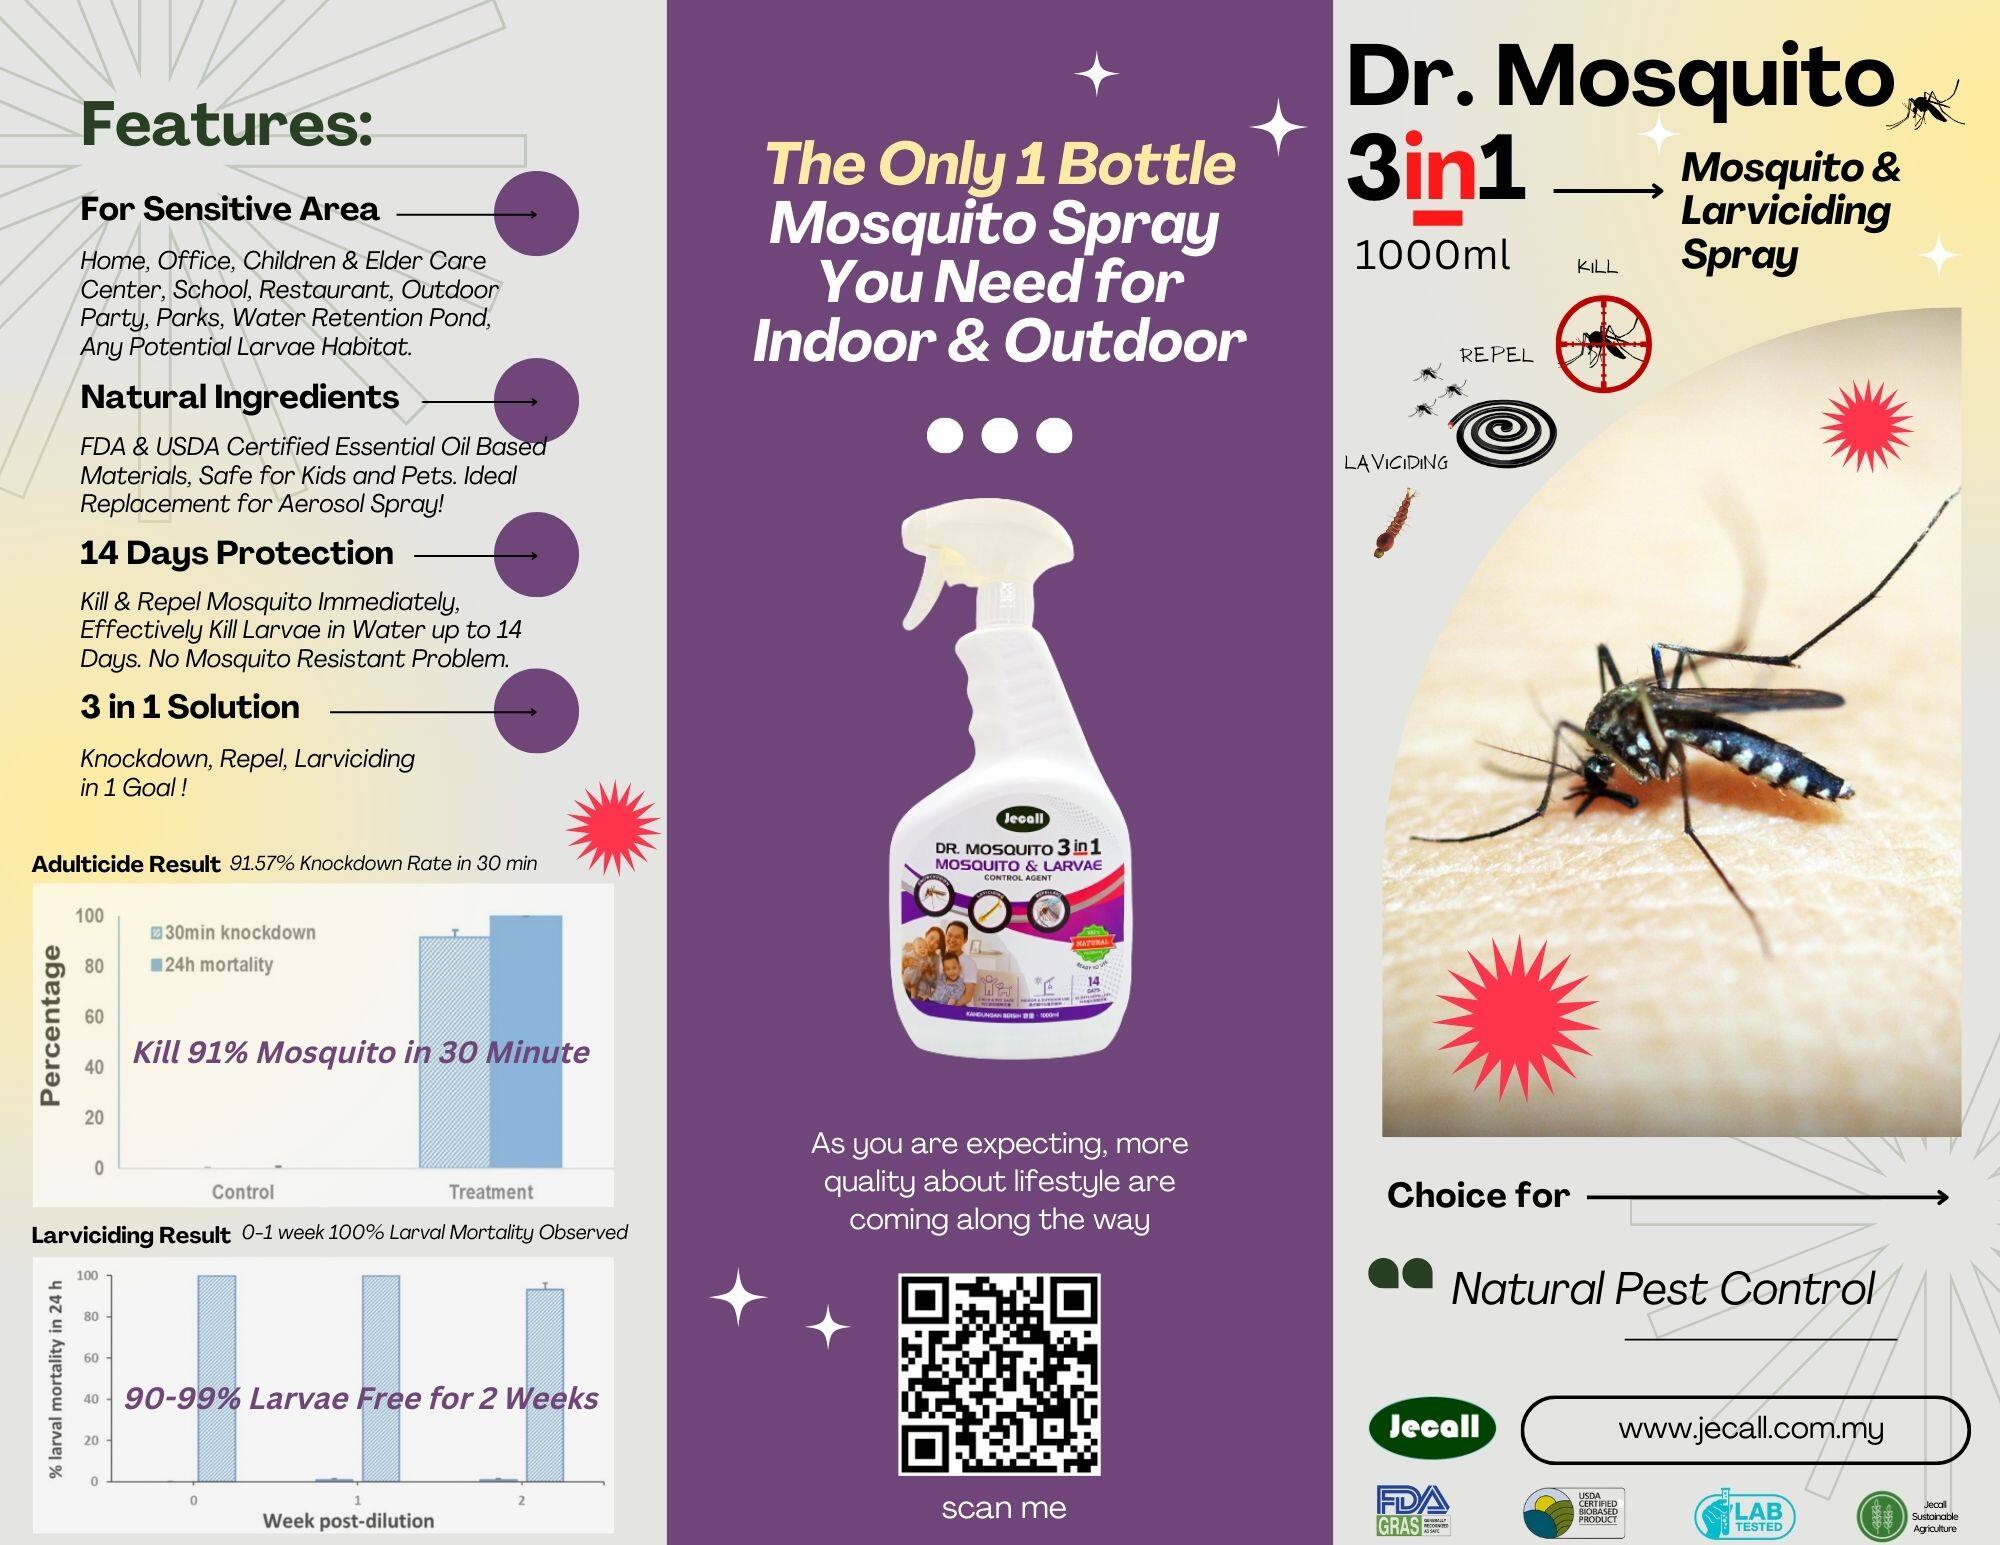 Jecall Dr Mosquito 3in1 1000ml Spray / Natural Mosquito Repellent / Natural Laviciding / Natural Mosquito Spray / USDA Organic EO Material